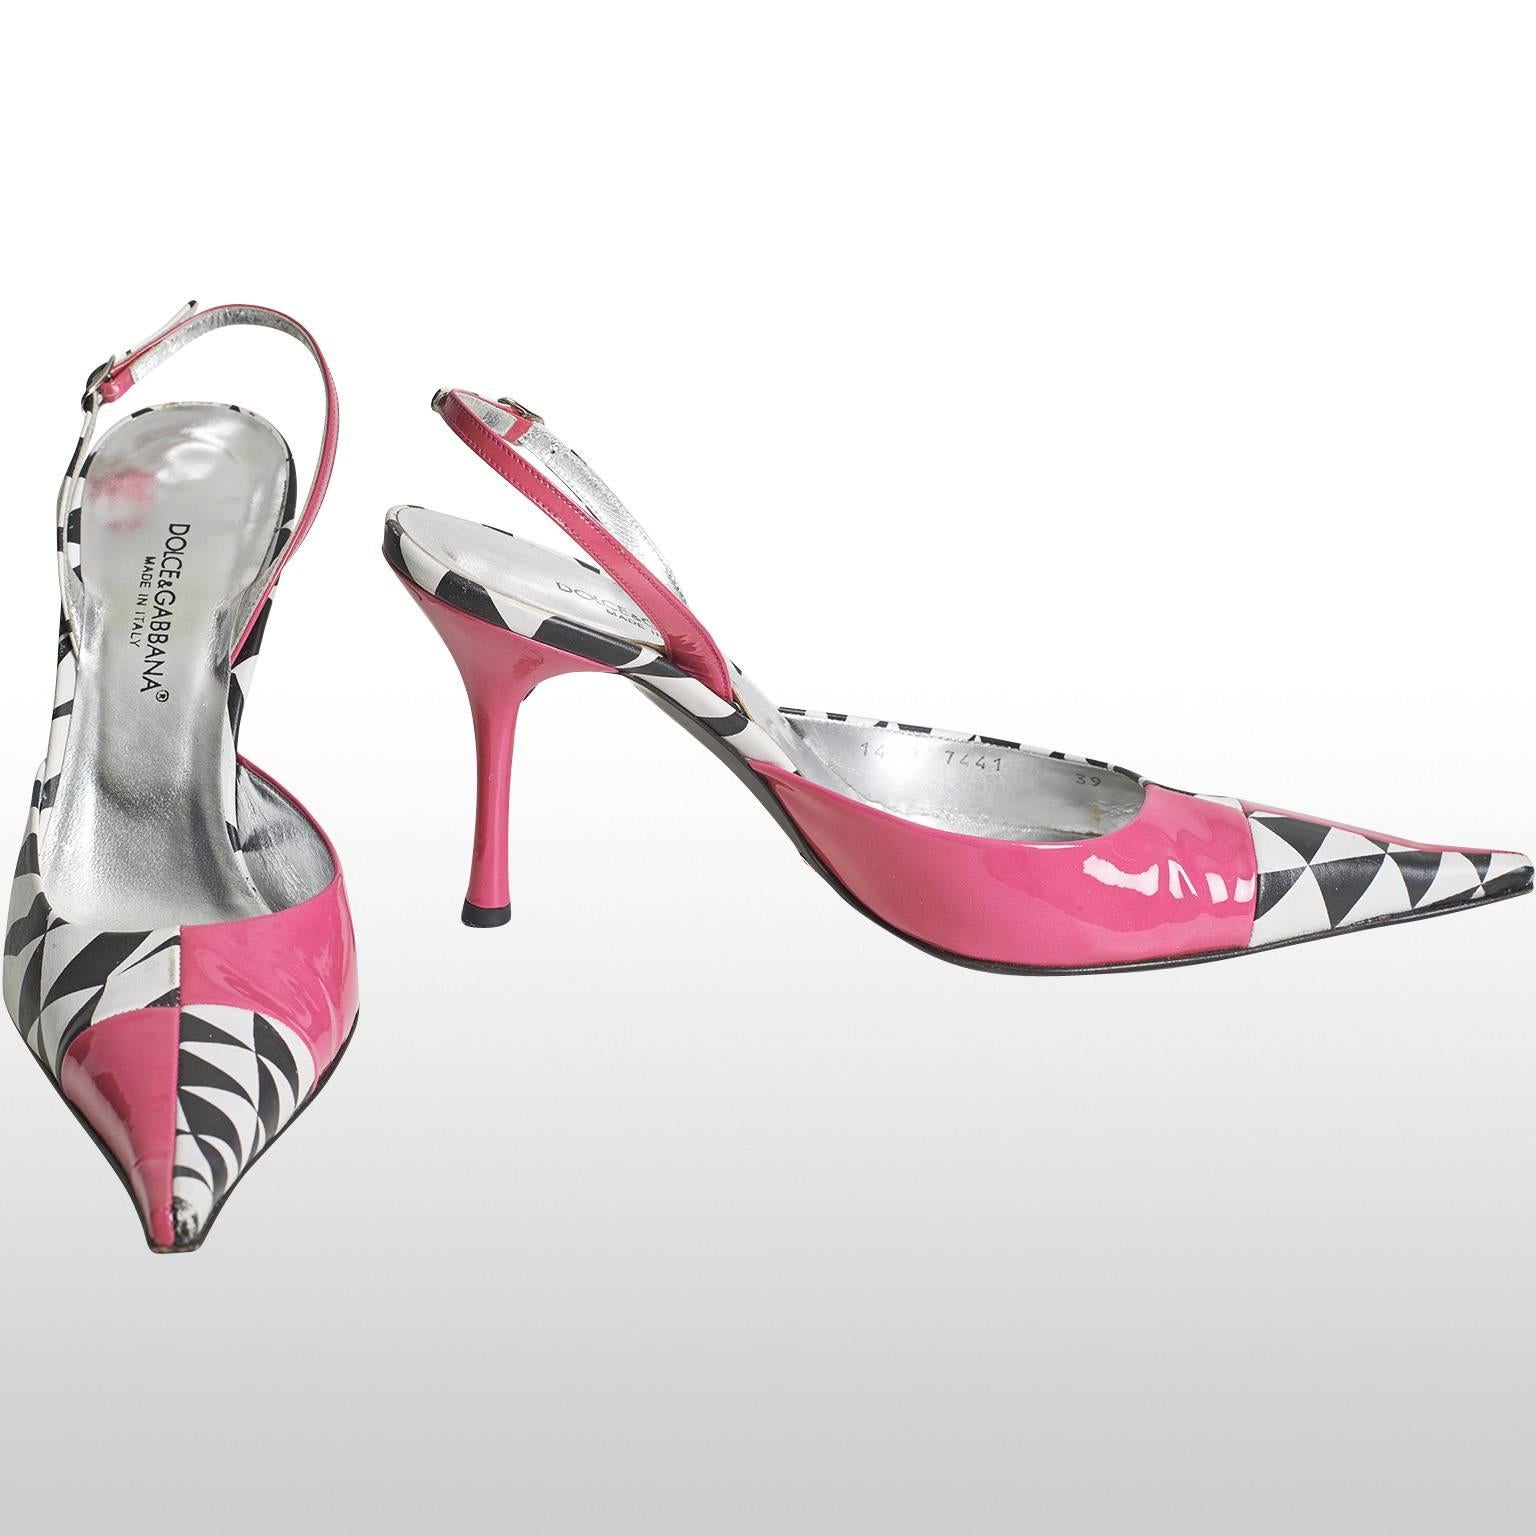 These are fun sandal shoes by Dolce and Gabbana. The shoe has a pointy toe with a check pink and monochrome pattern. The heel of the foot is secured with a thin strap and a small metallic buckle. The insole of the shoe comes in a shiny metallic